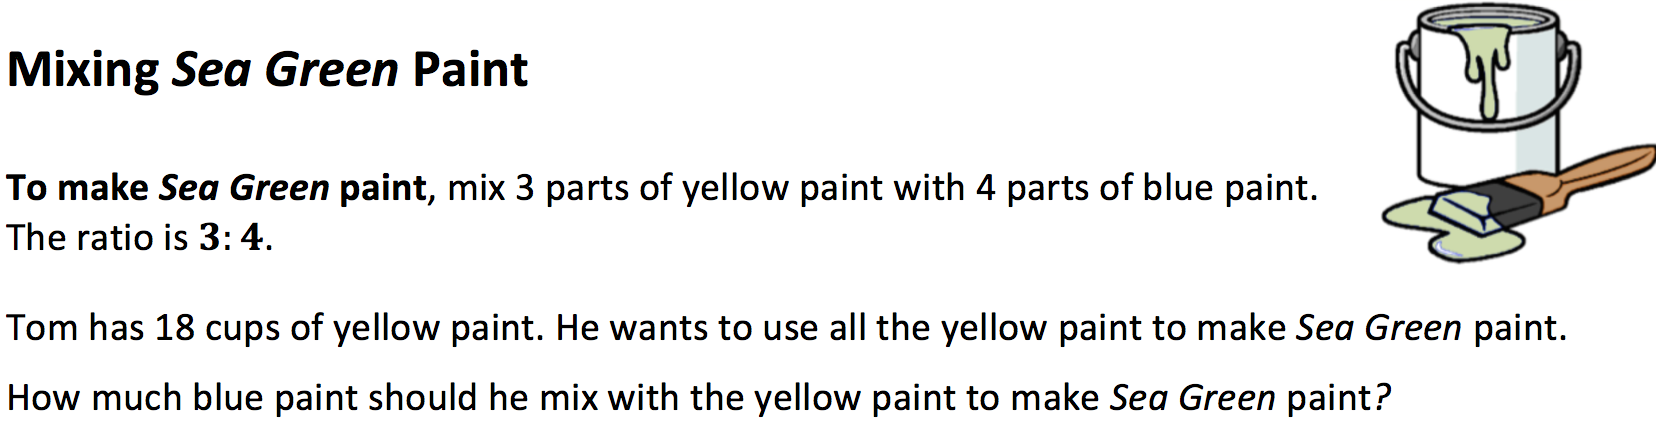 A math task with a picture of a paint can and a brush, both with green paint. Mixing Sea Green Paint. To make Sea Green paint, mix 3 parts of yellow paint with 4 parts of blue paint. The ratio is 3:4. Tom has 18 cups of yellow paint. He wants to use all the yellow paint to make Sea Green paint. How much blue paint should he mix with the yellow paint to make Sea Green paint?